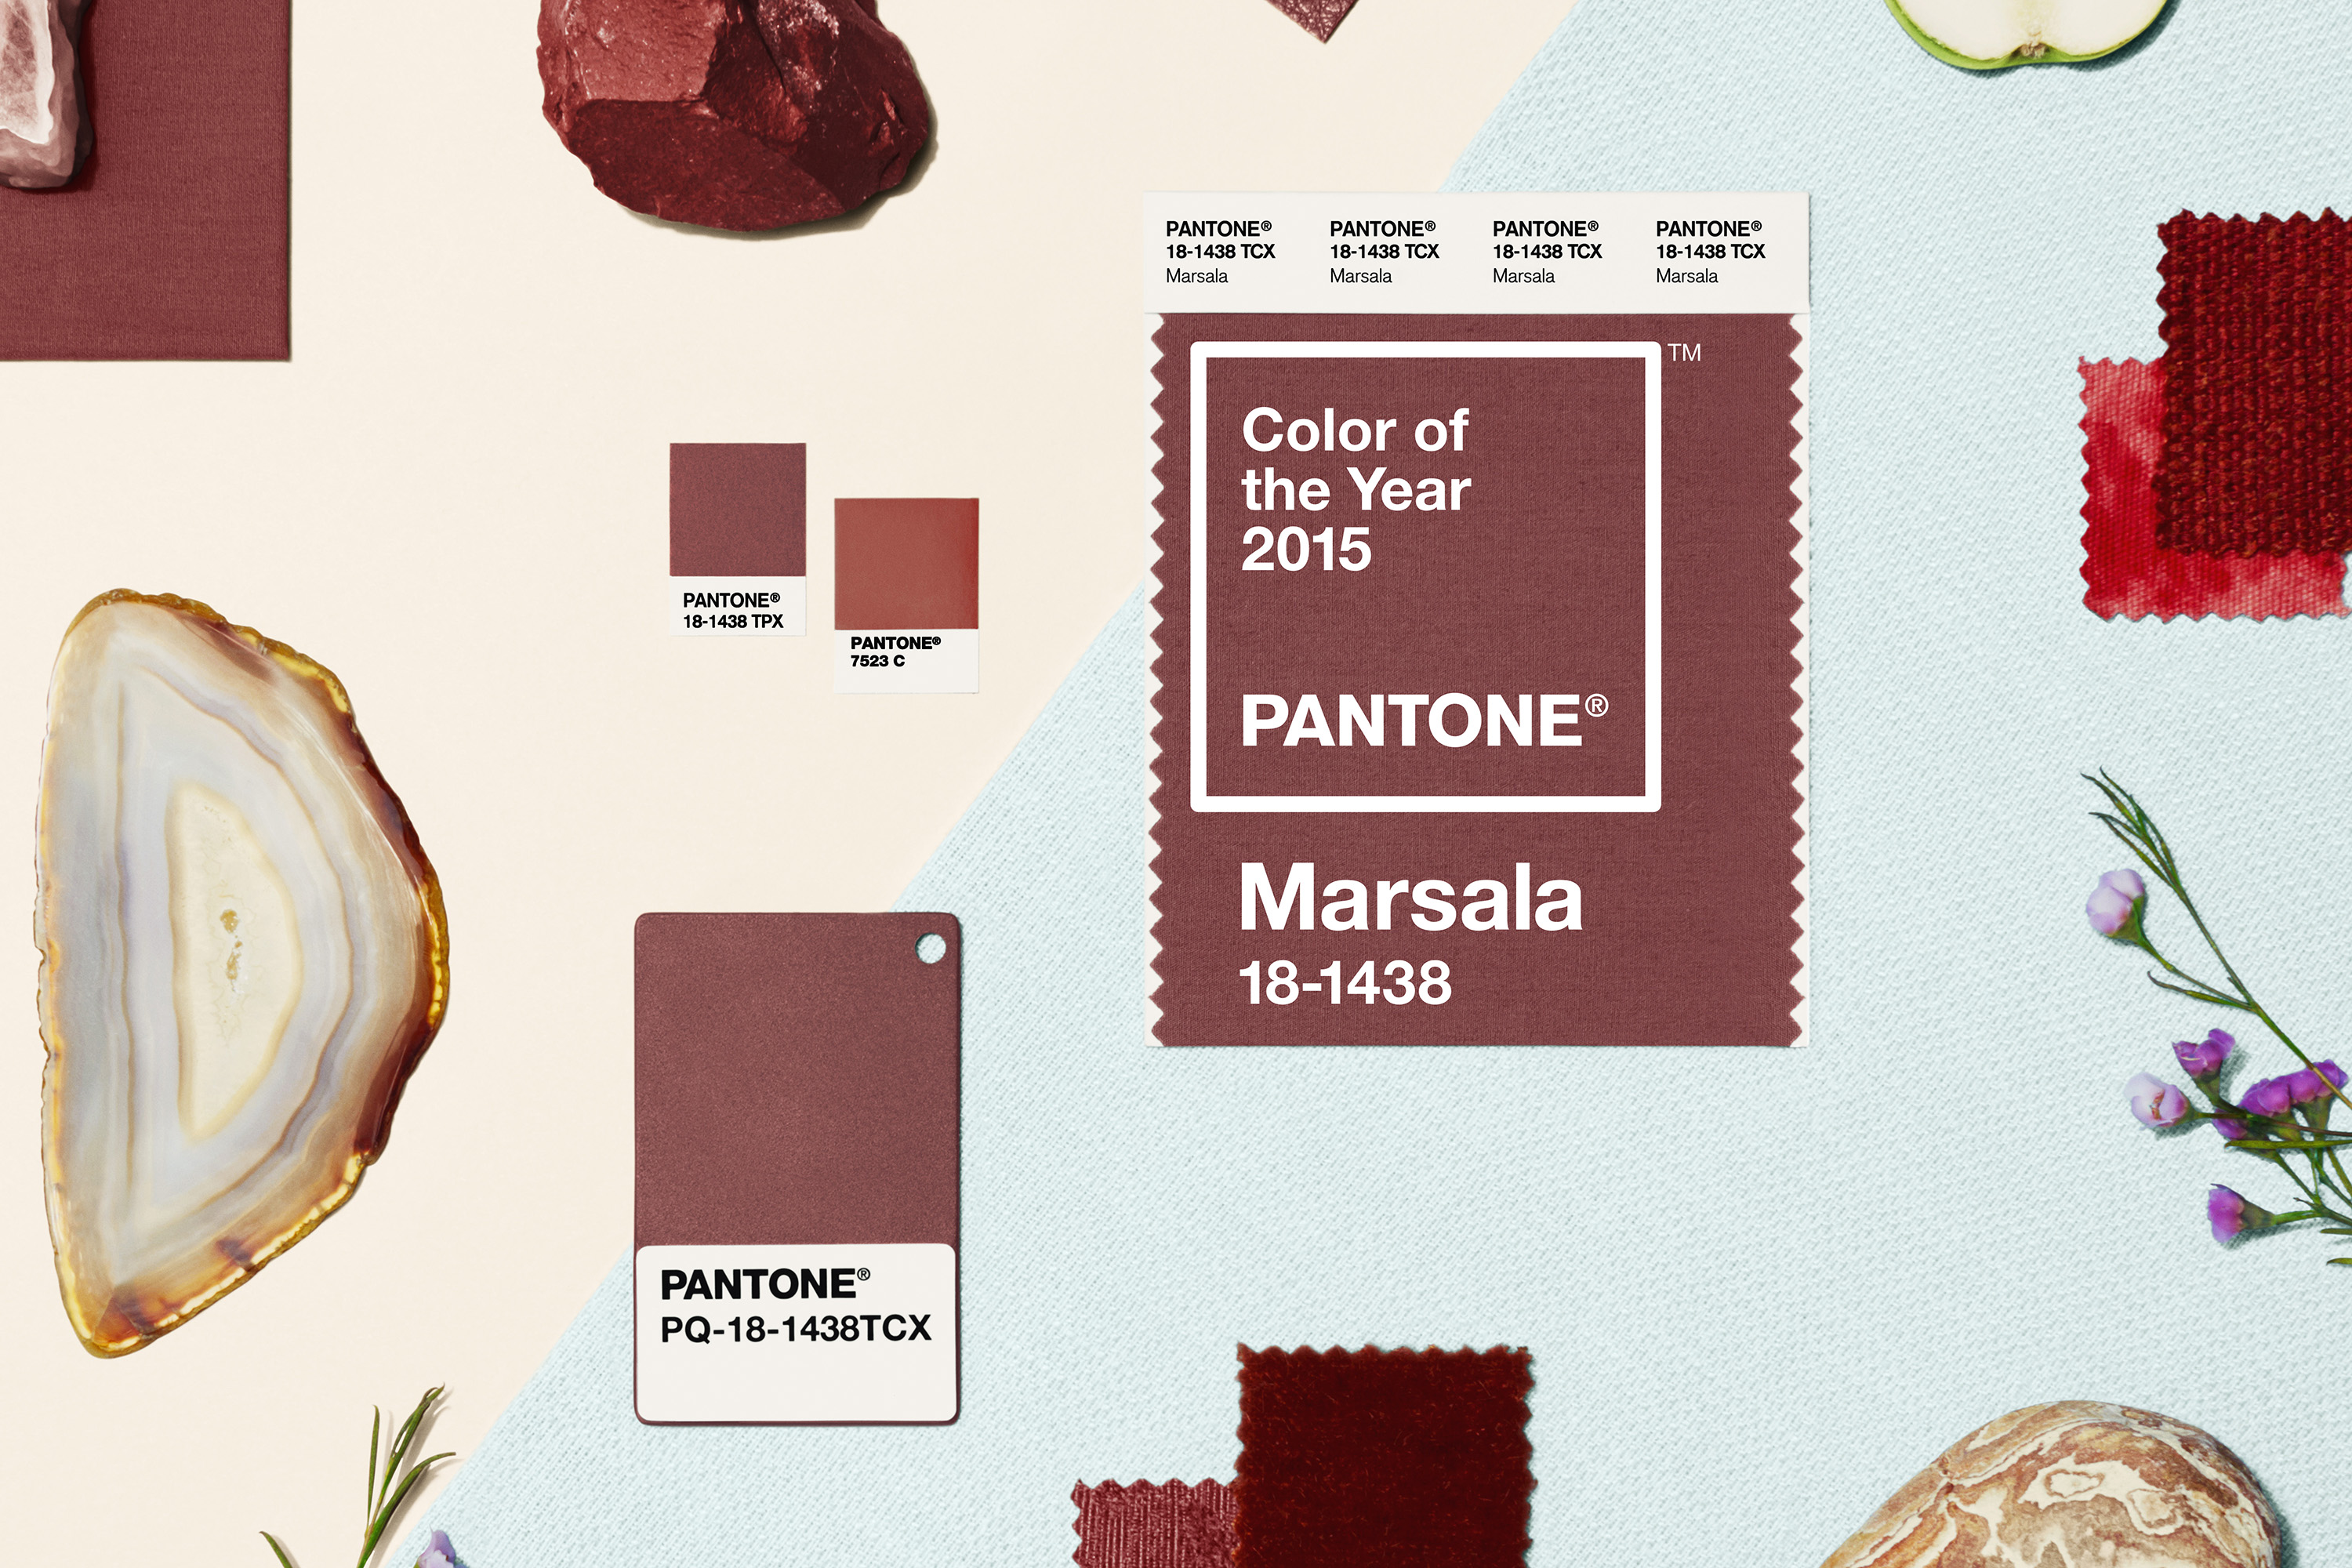 Pantone Color of the Year 2015 - Marsala